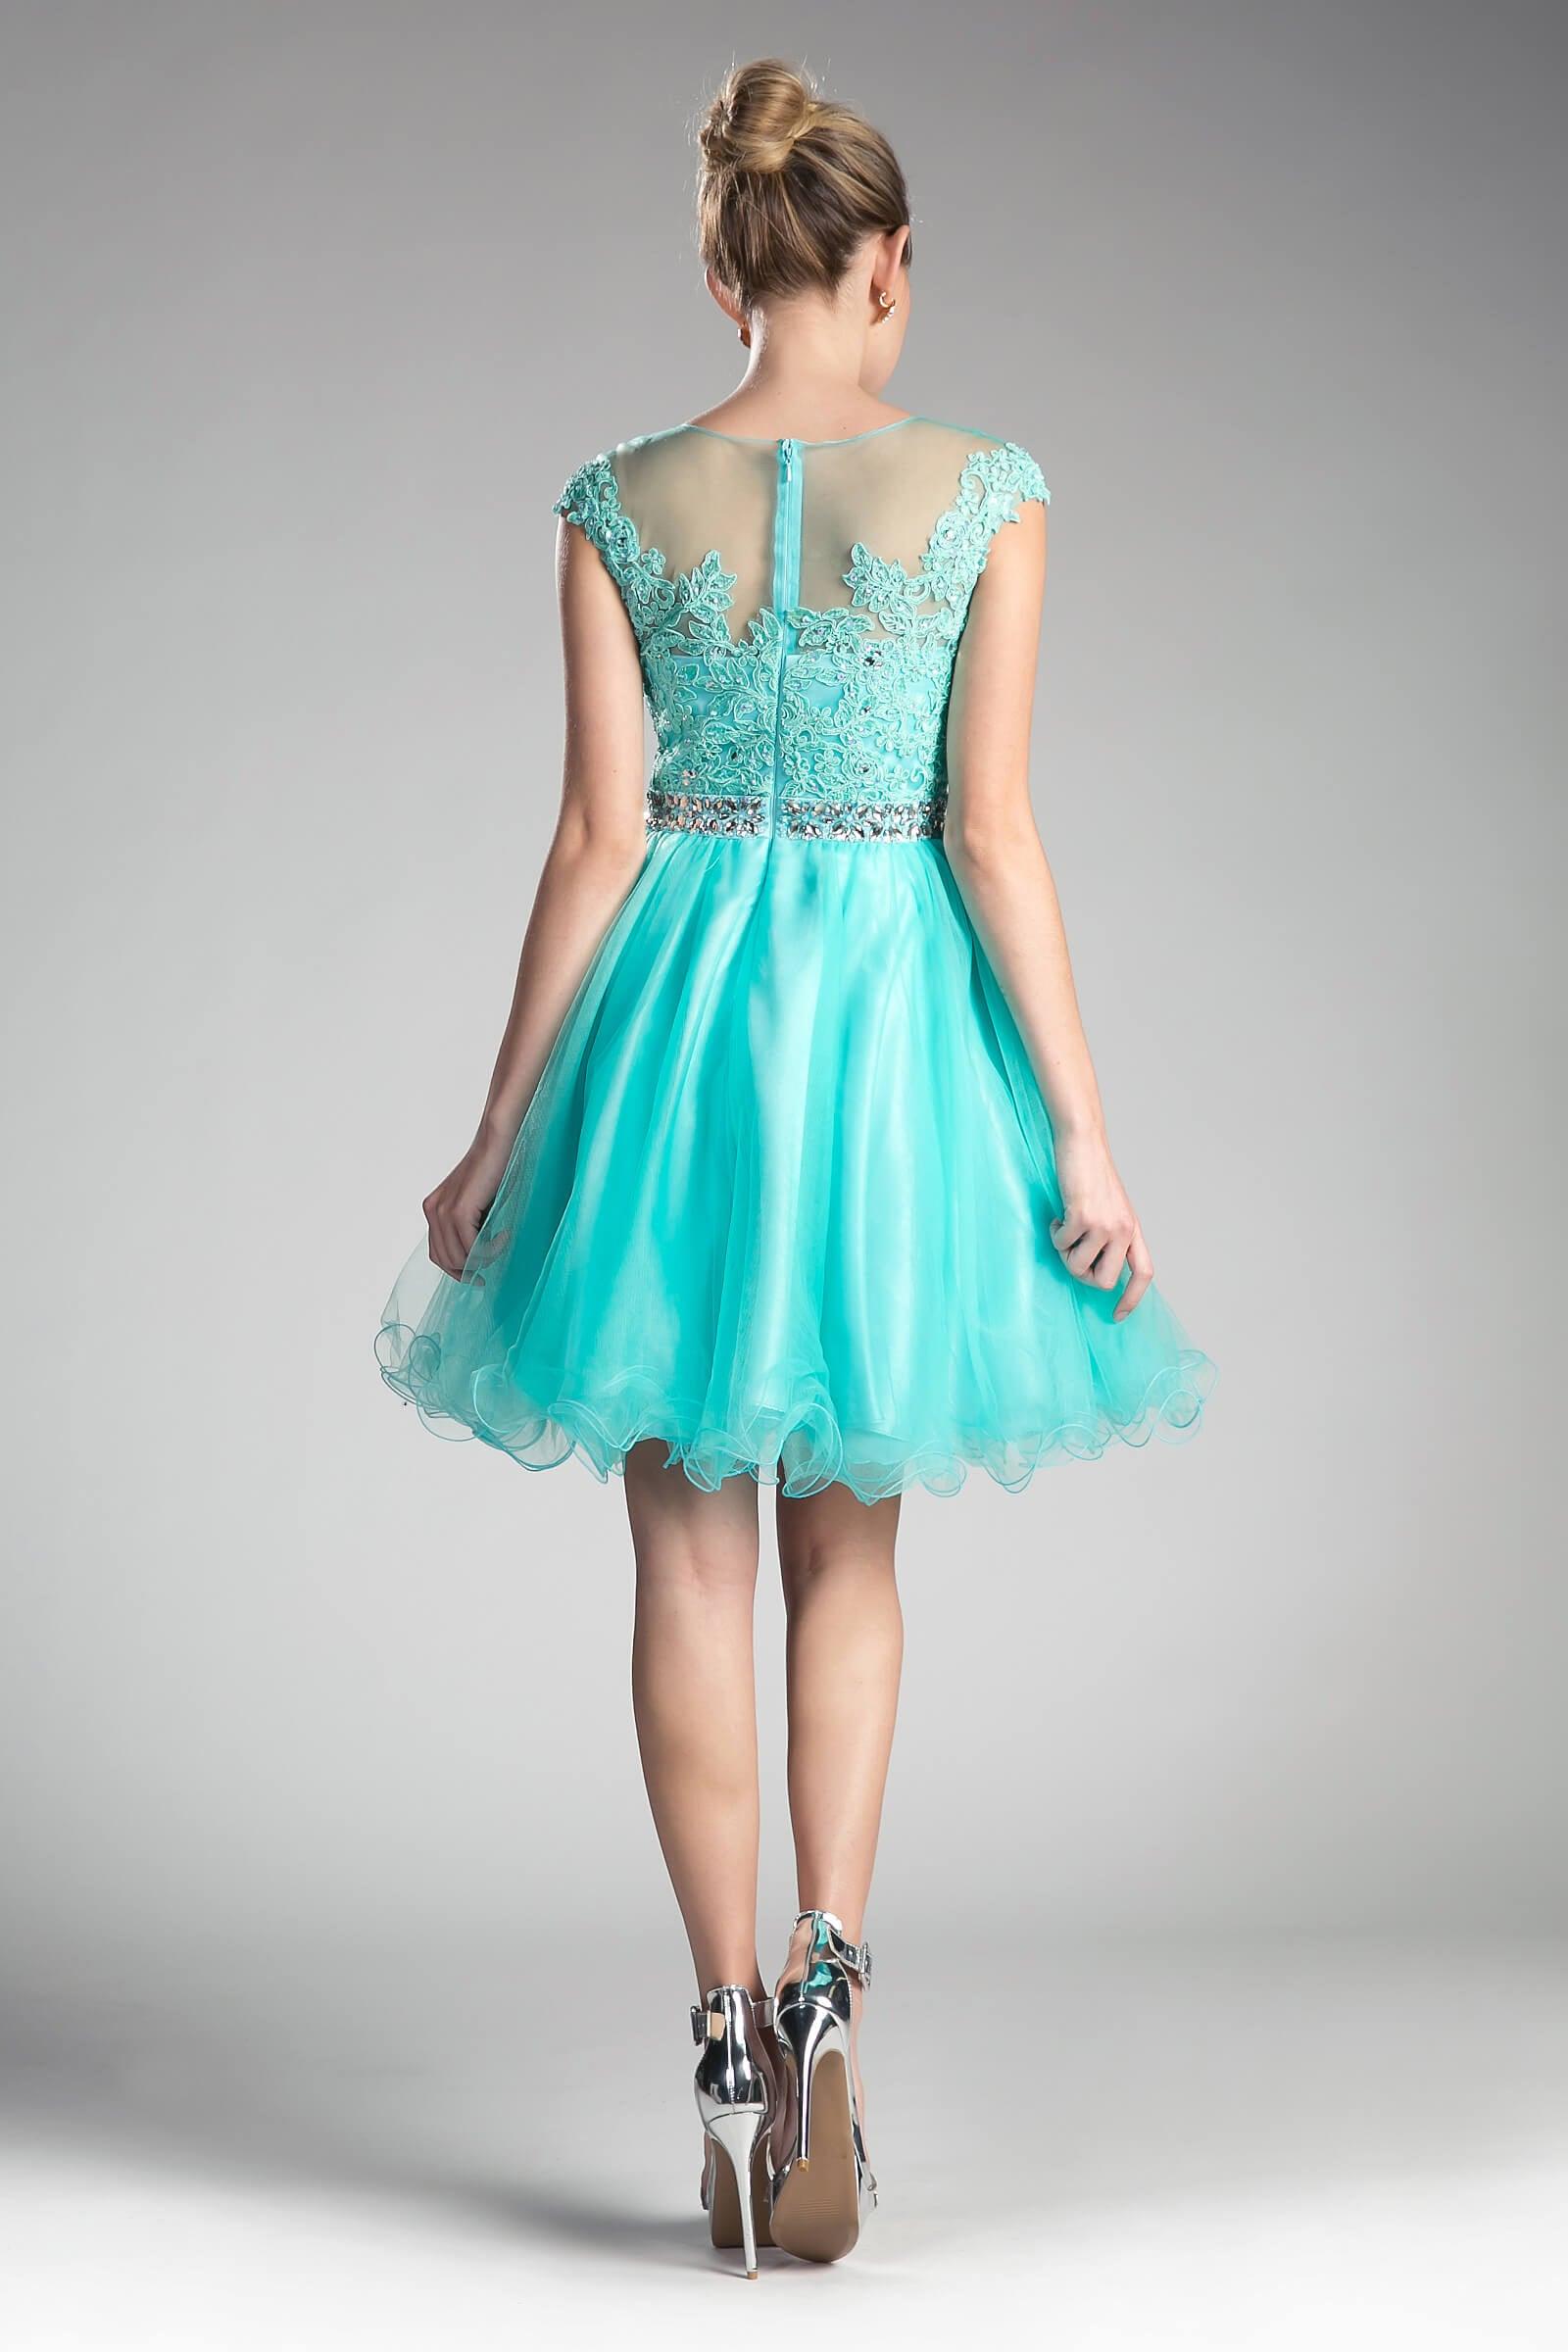 Prom Short Cap Sleeve Lace Homecoming Dress - The Dress Outlet Cinderella Divine